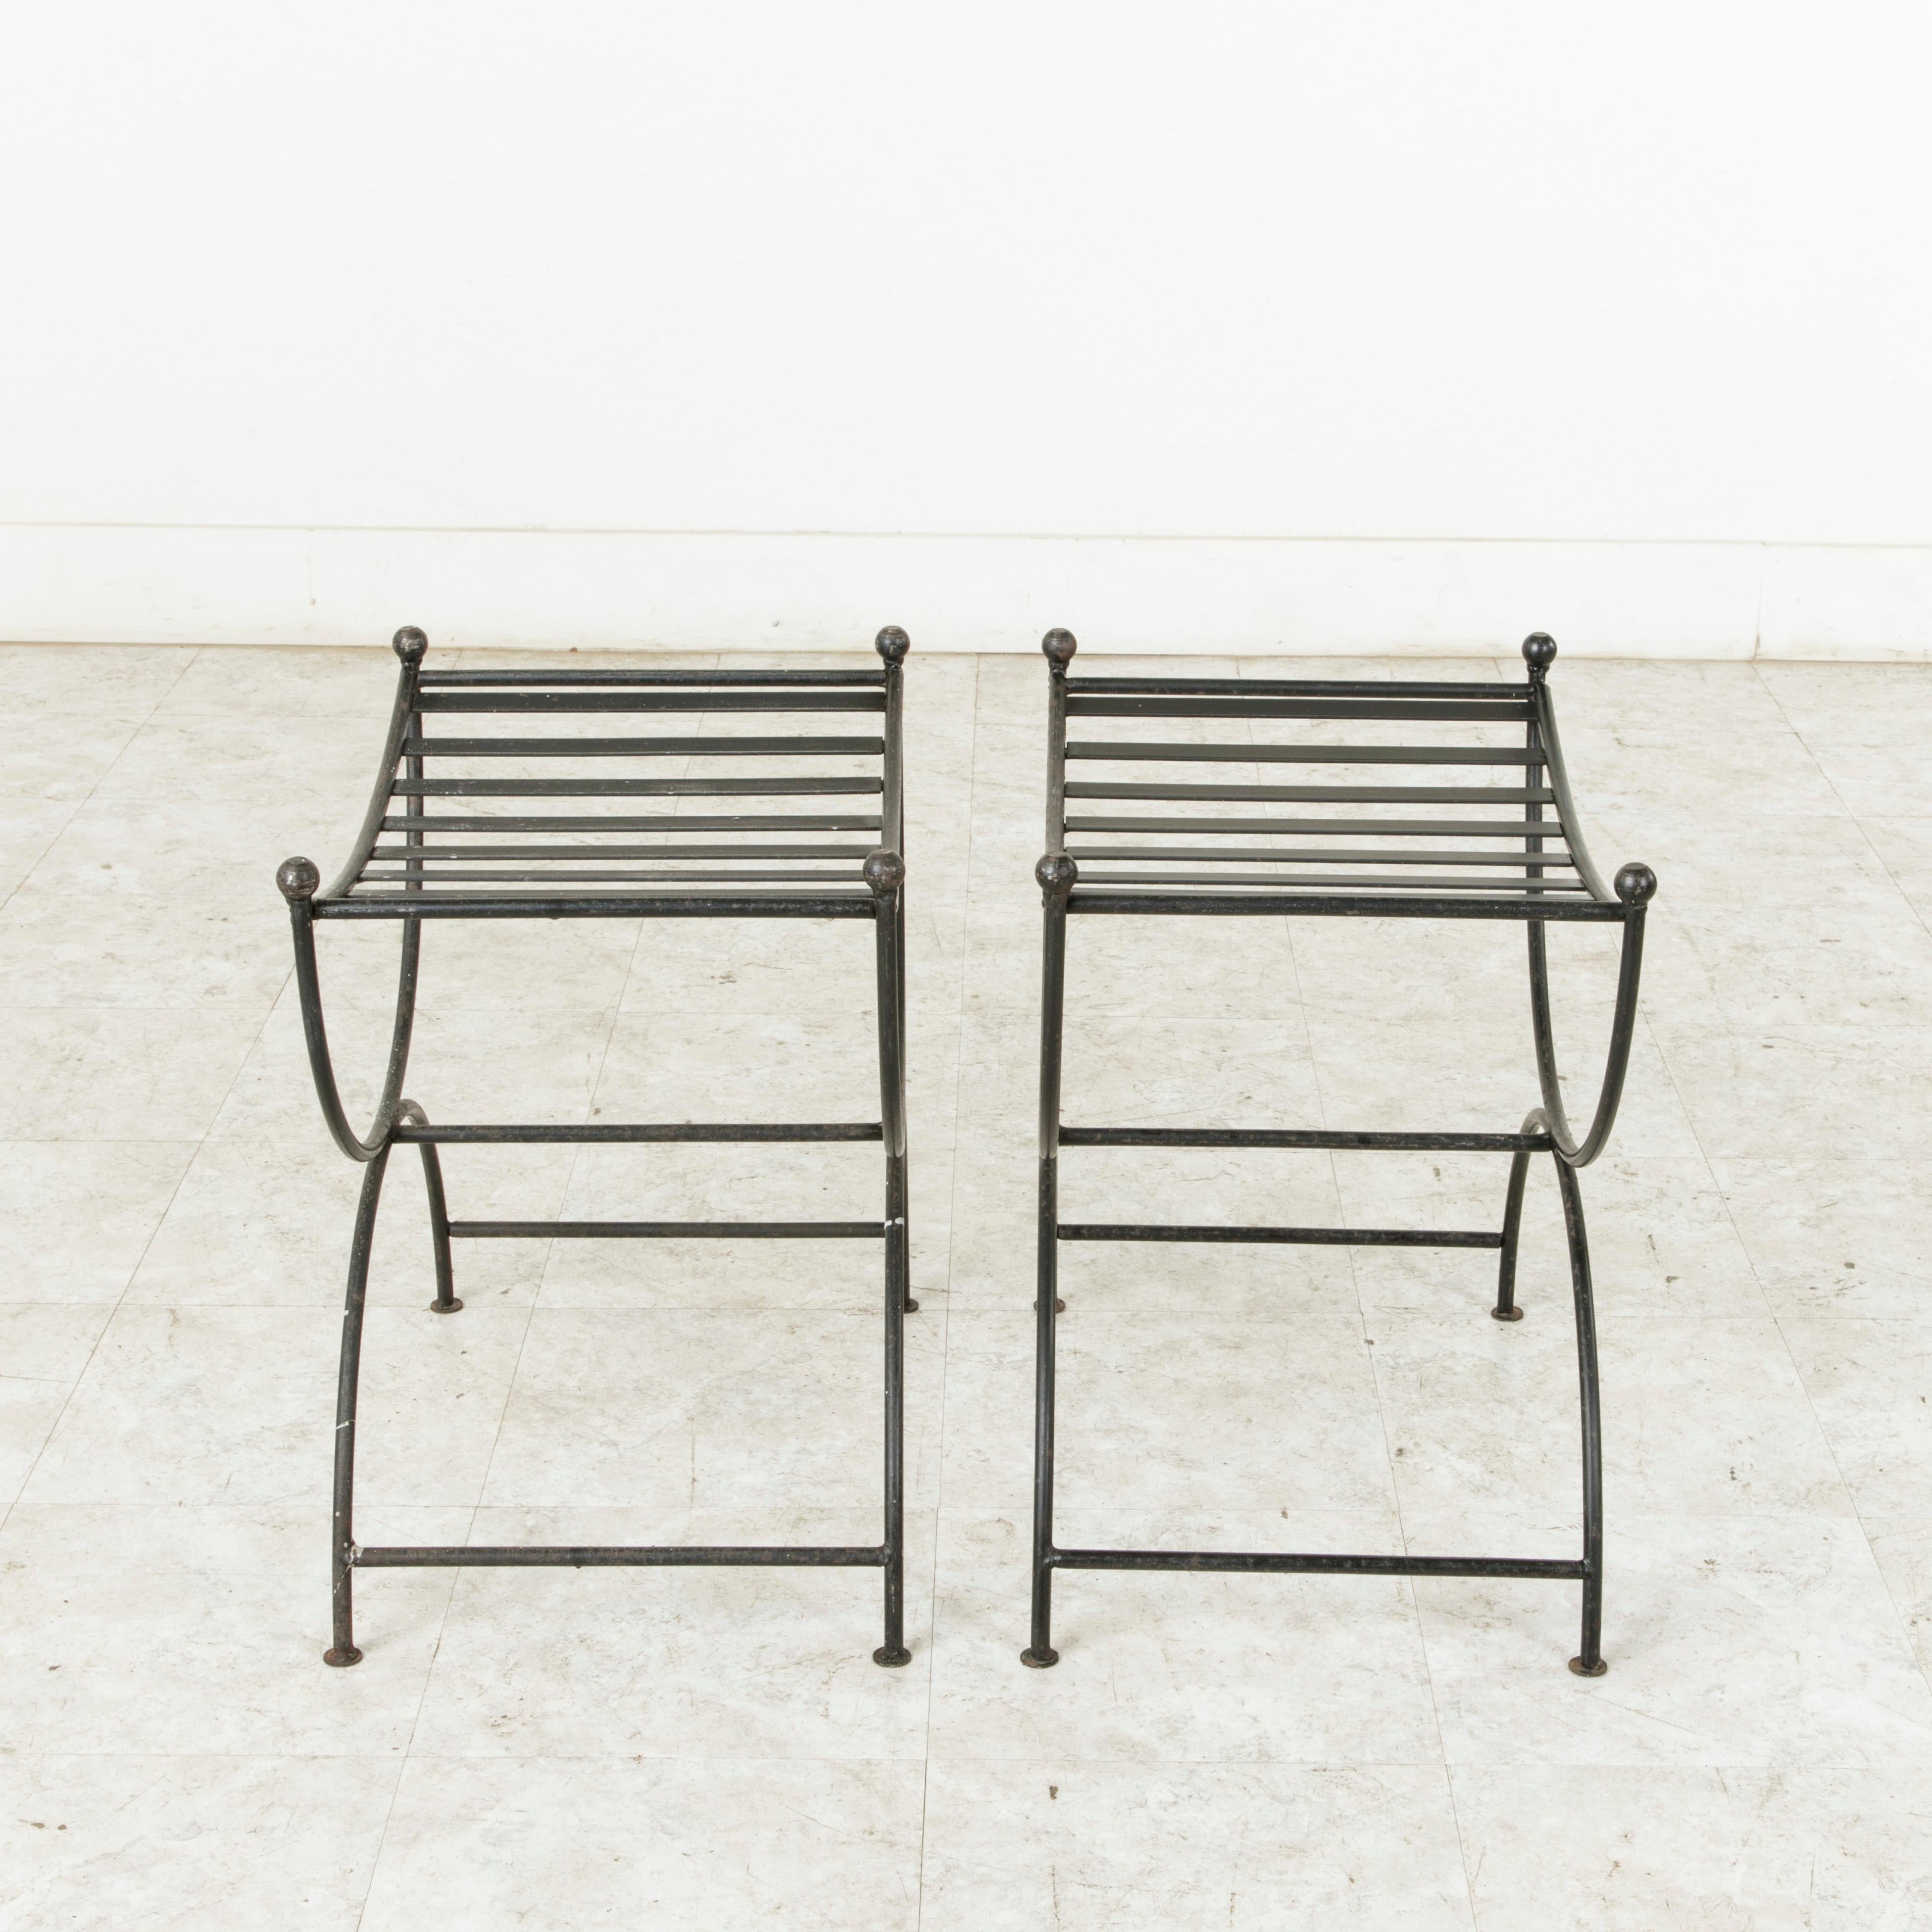 Pair of Mid-20th Century French Iron Benches, Banquettes, or Stools 1